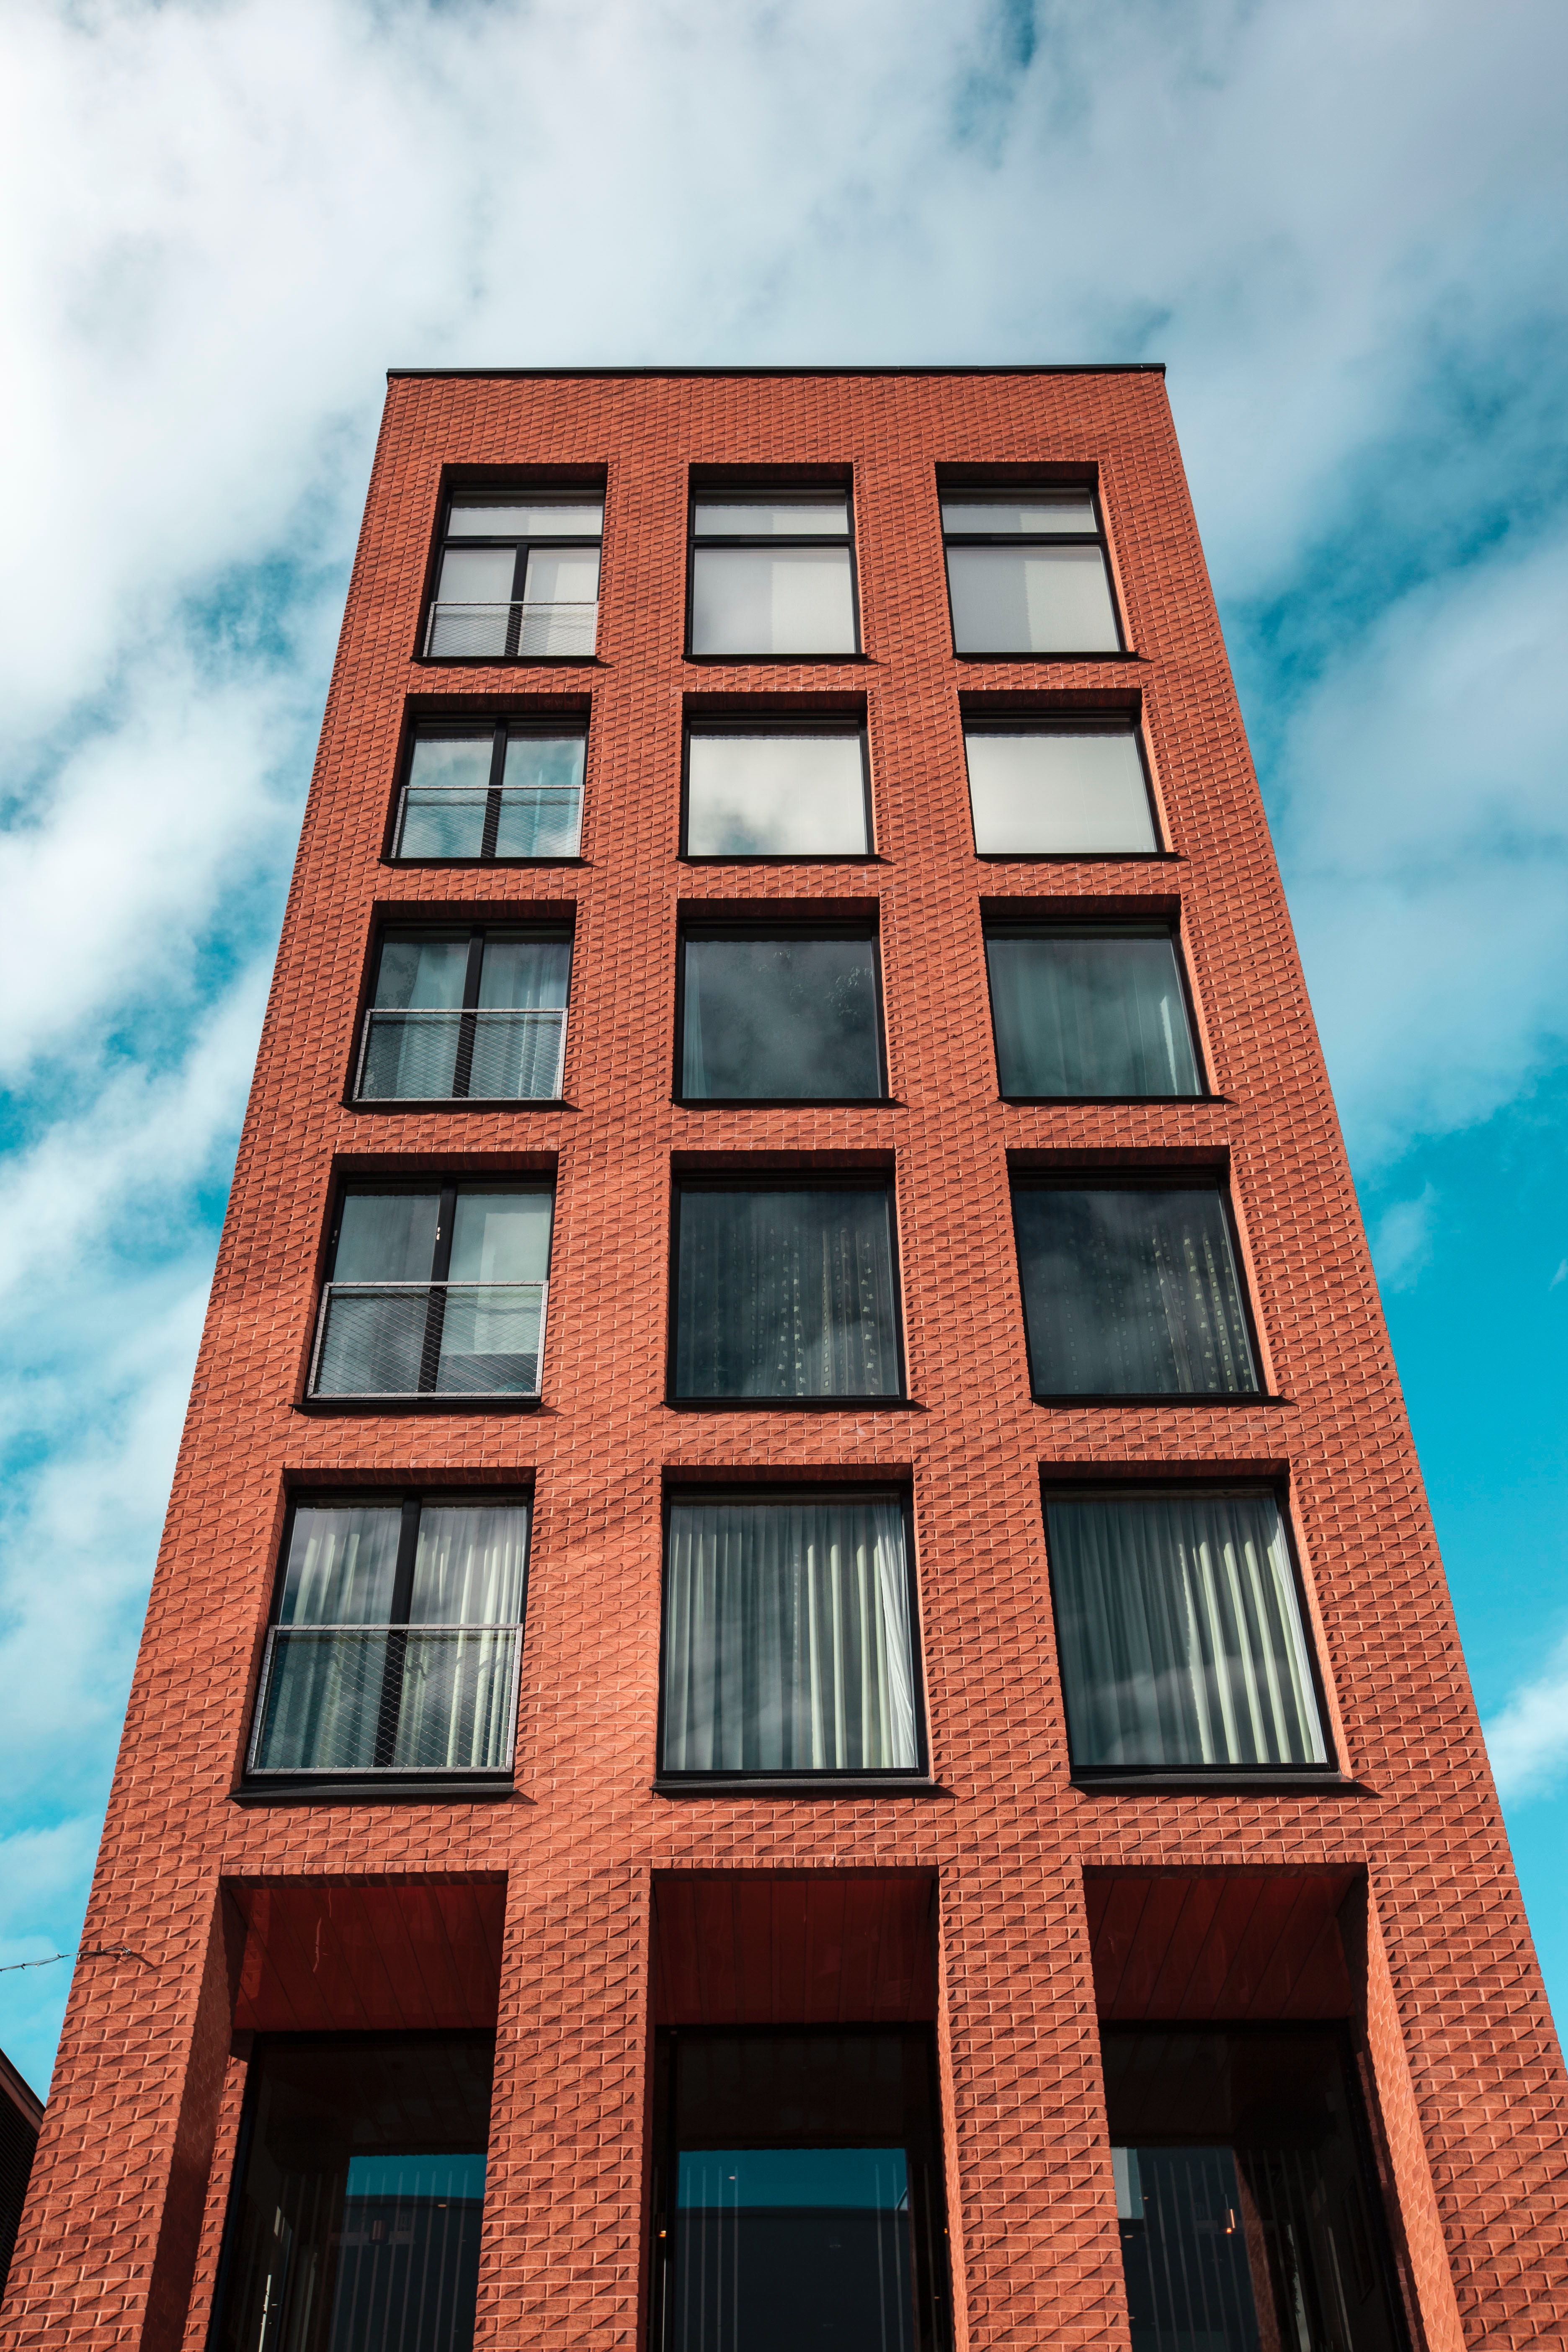 Low angle photo of a red and black concrete high-rise building